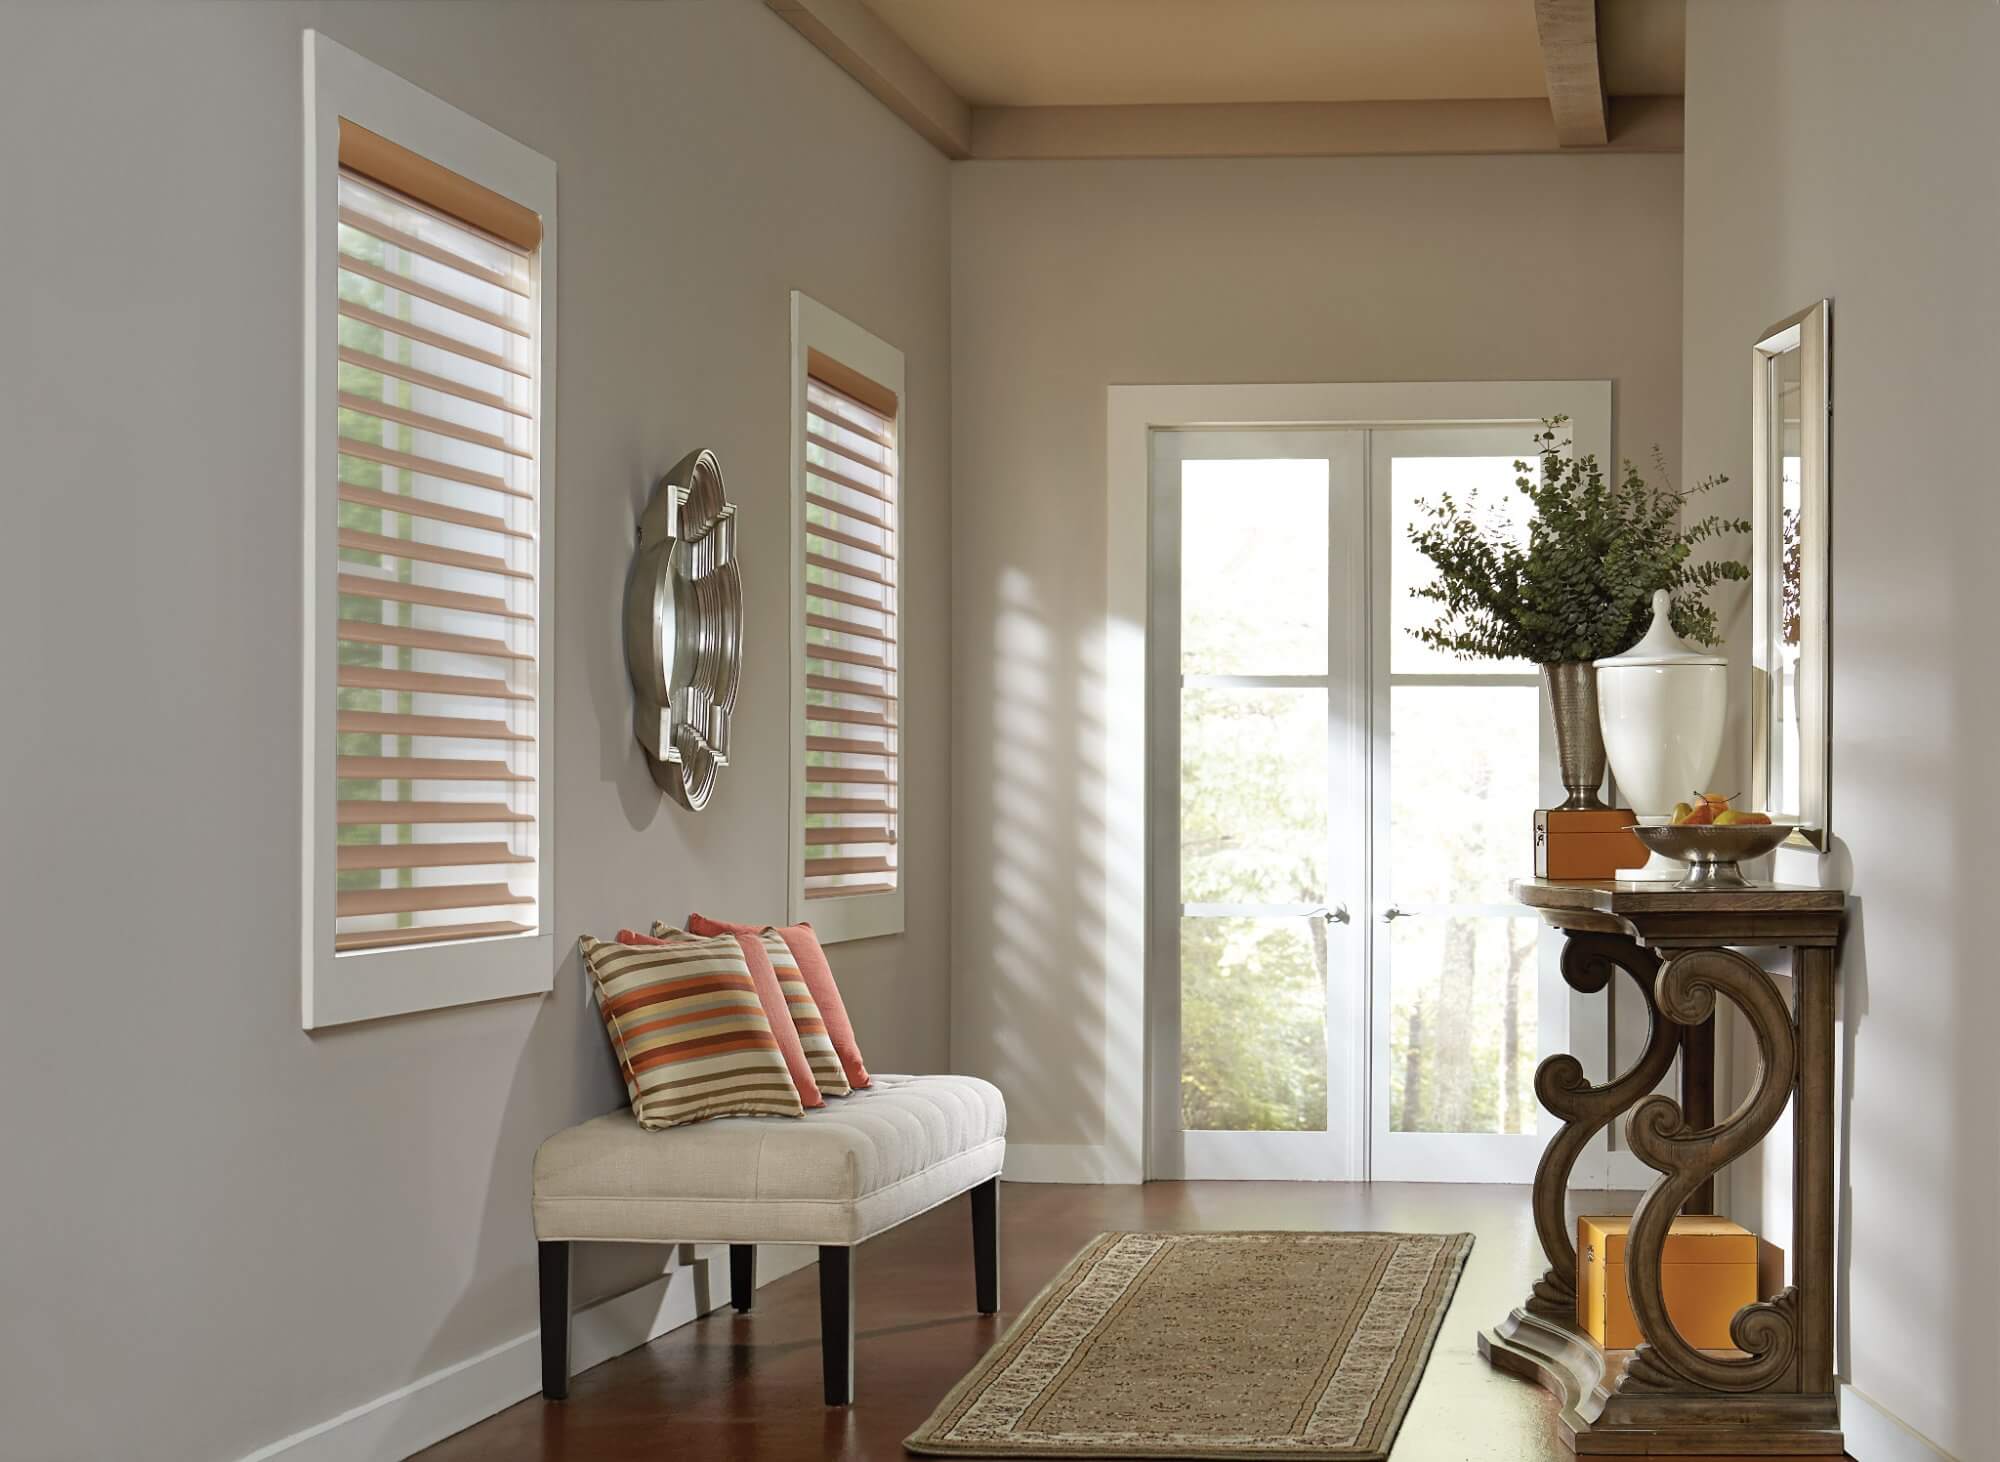 Organize your entryway and try adding elegant window treatments to transom windows to make a great first impression.